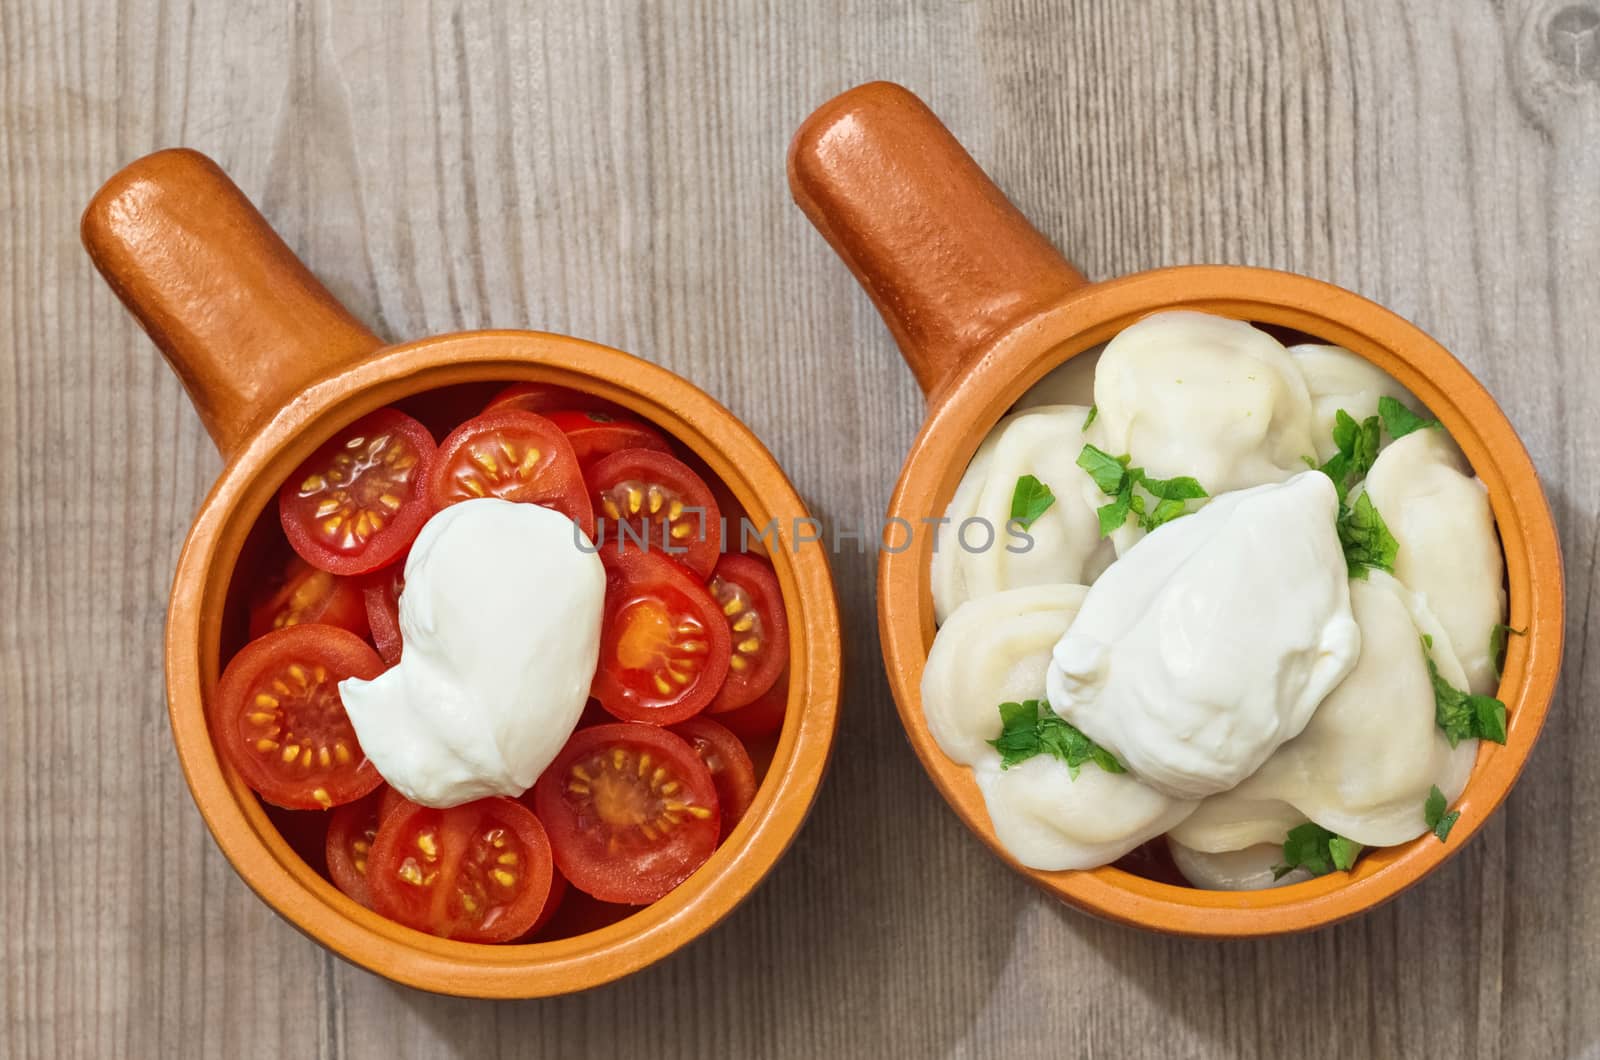 Chopped tomatoes and dumplings with sour cream, in a ceramic Cup on old wooden surface.